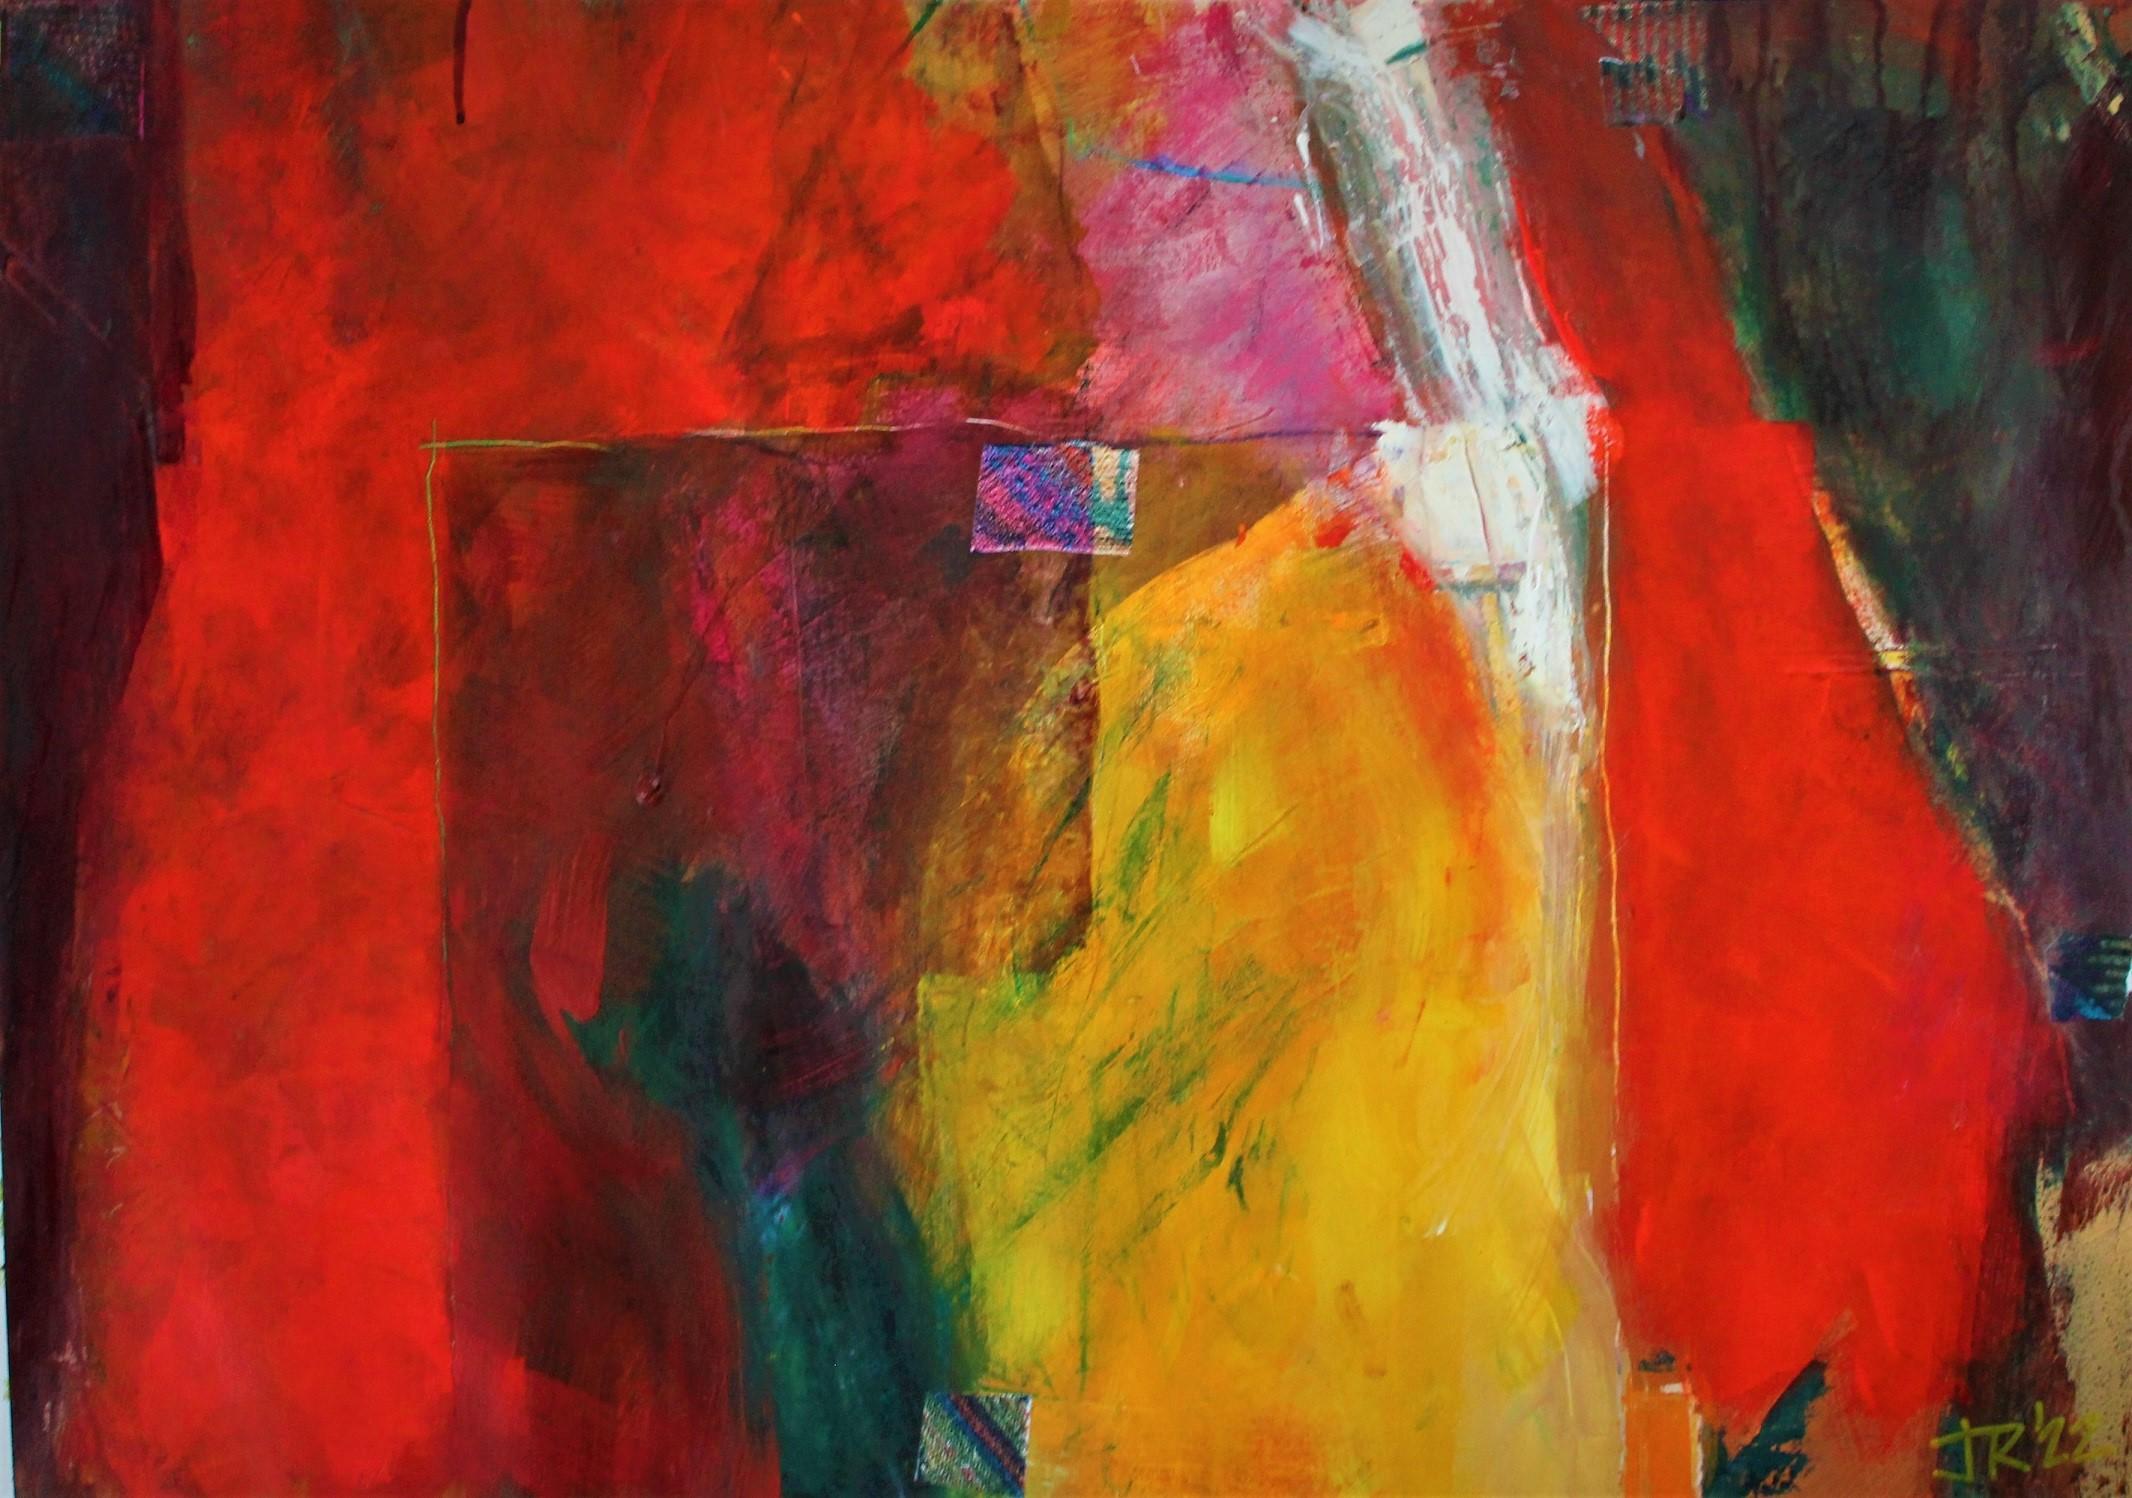 Jon Rowland  Landscape Painting - Prism by John Rowland, Abstract art, Abstract expressionism, Gestural painting